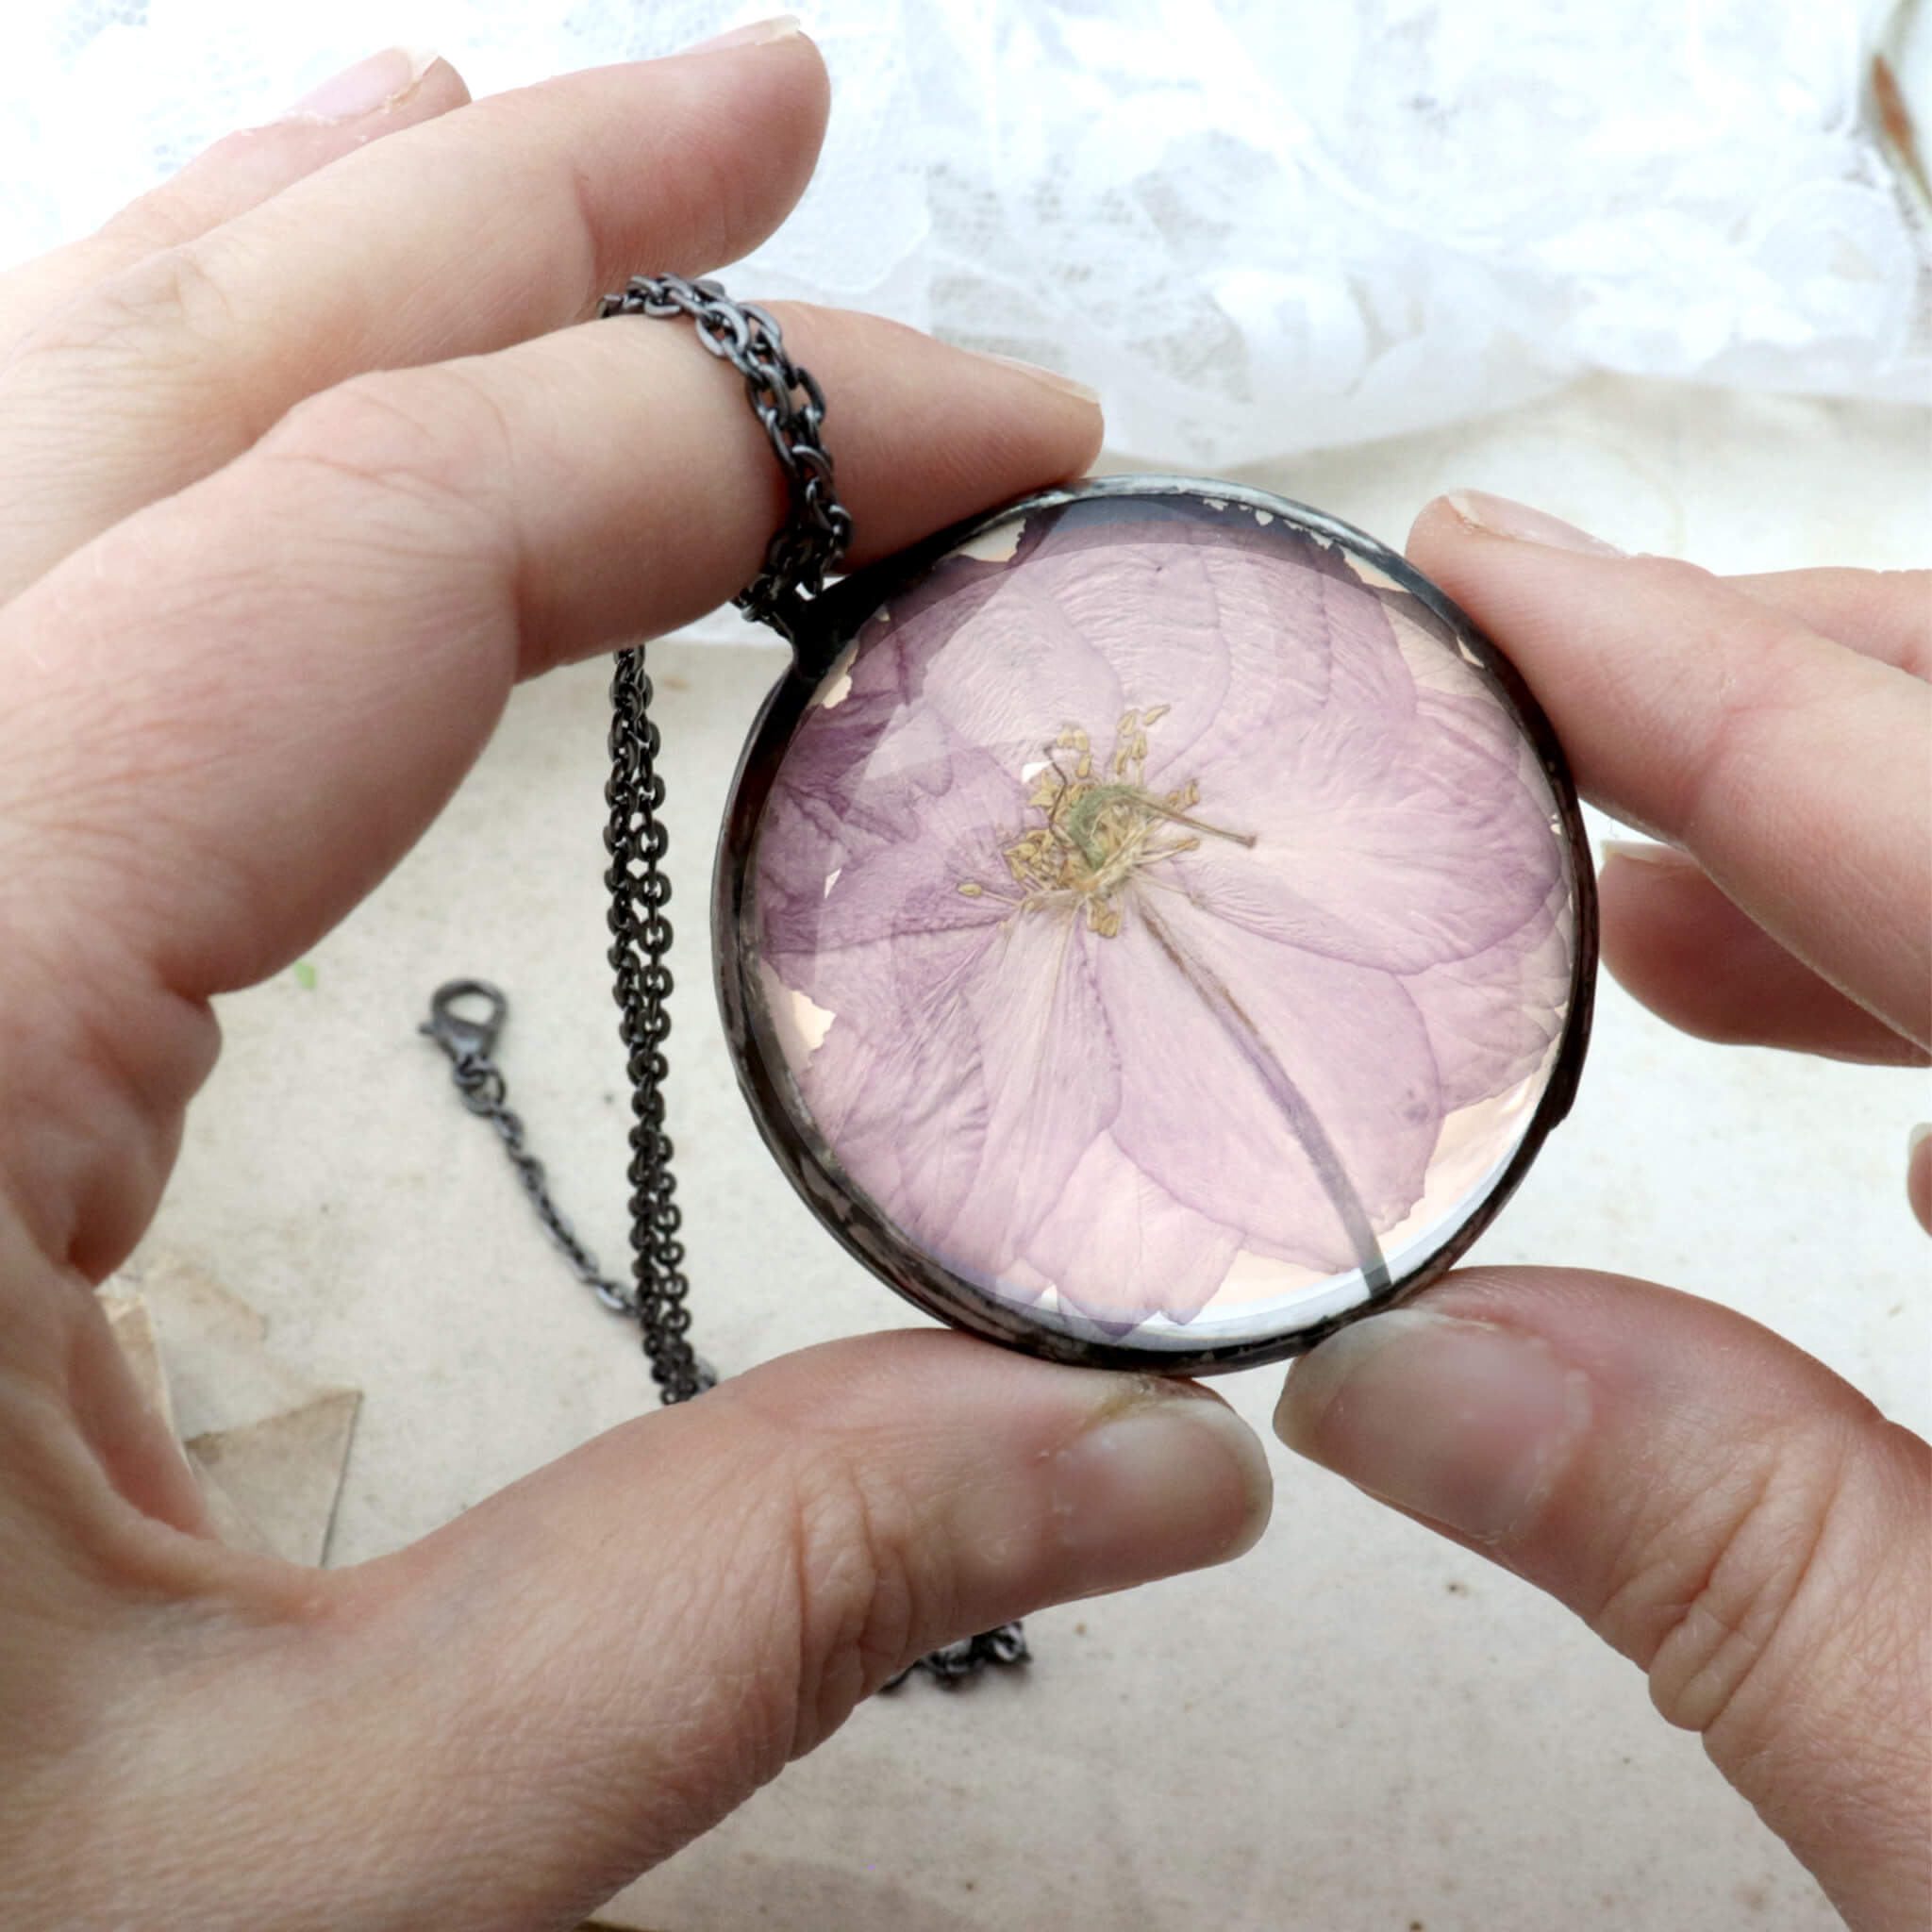 Round cherry blossom necklace being hold in hands